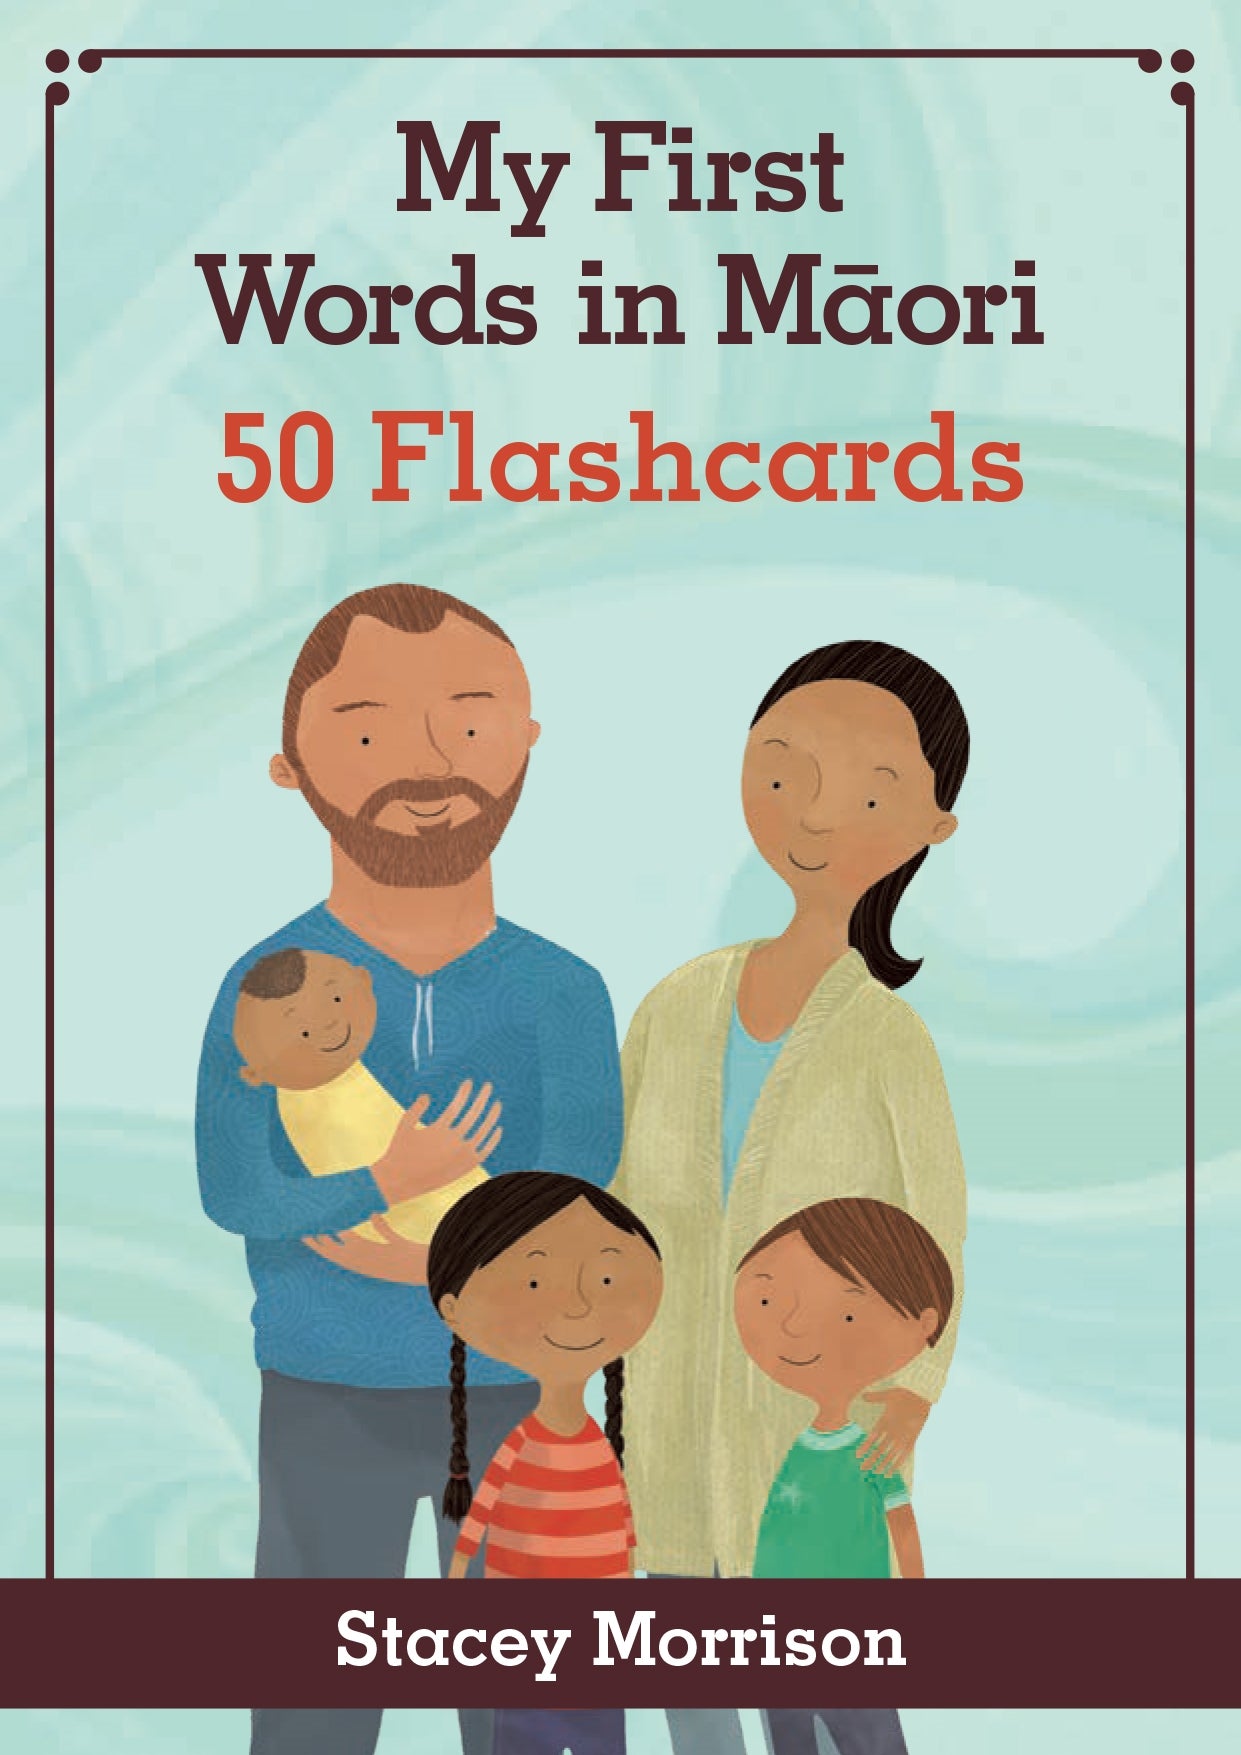 My First Words in Maori: Flashcards by Stacey Morrison - City Books & Lotto